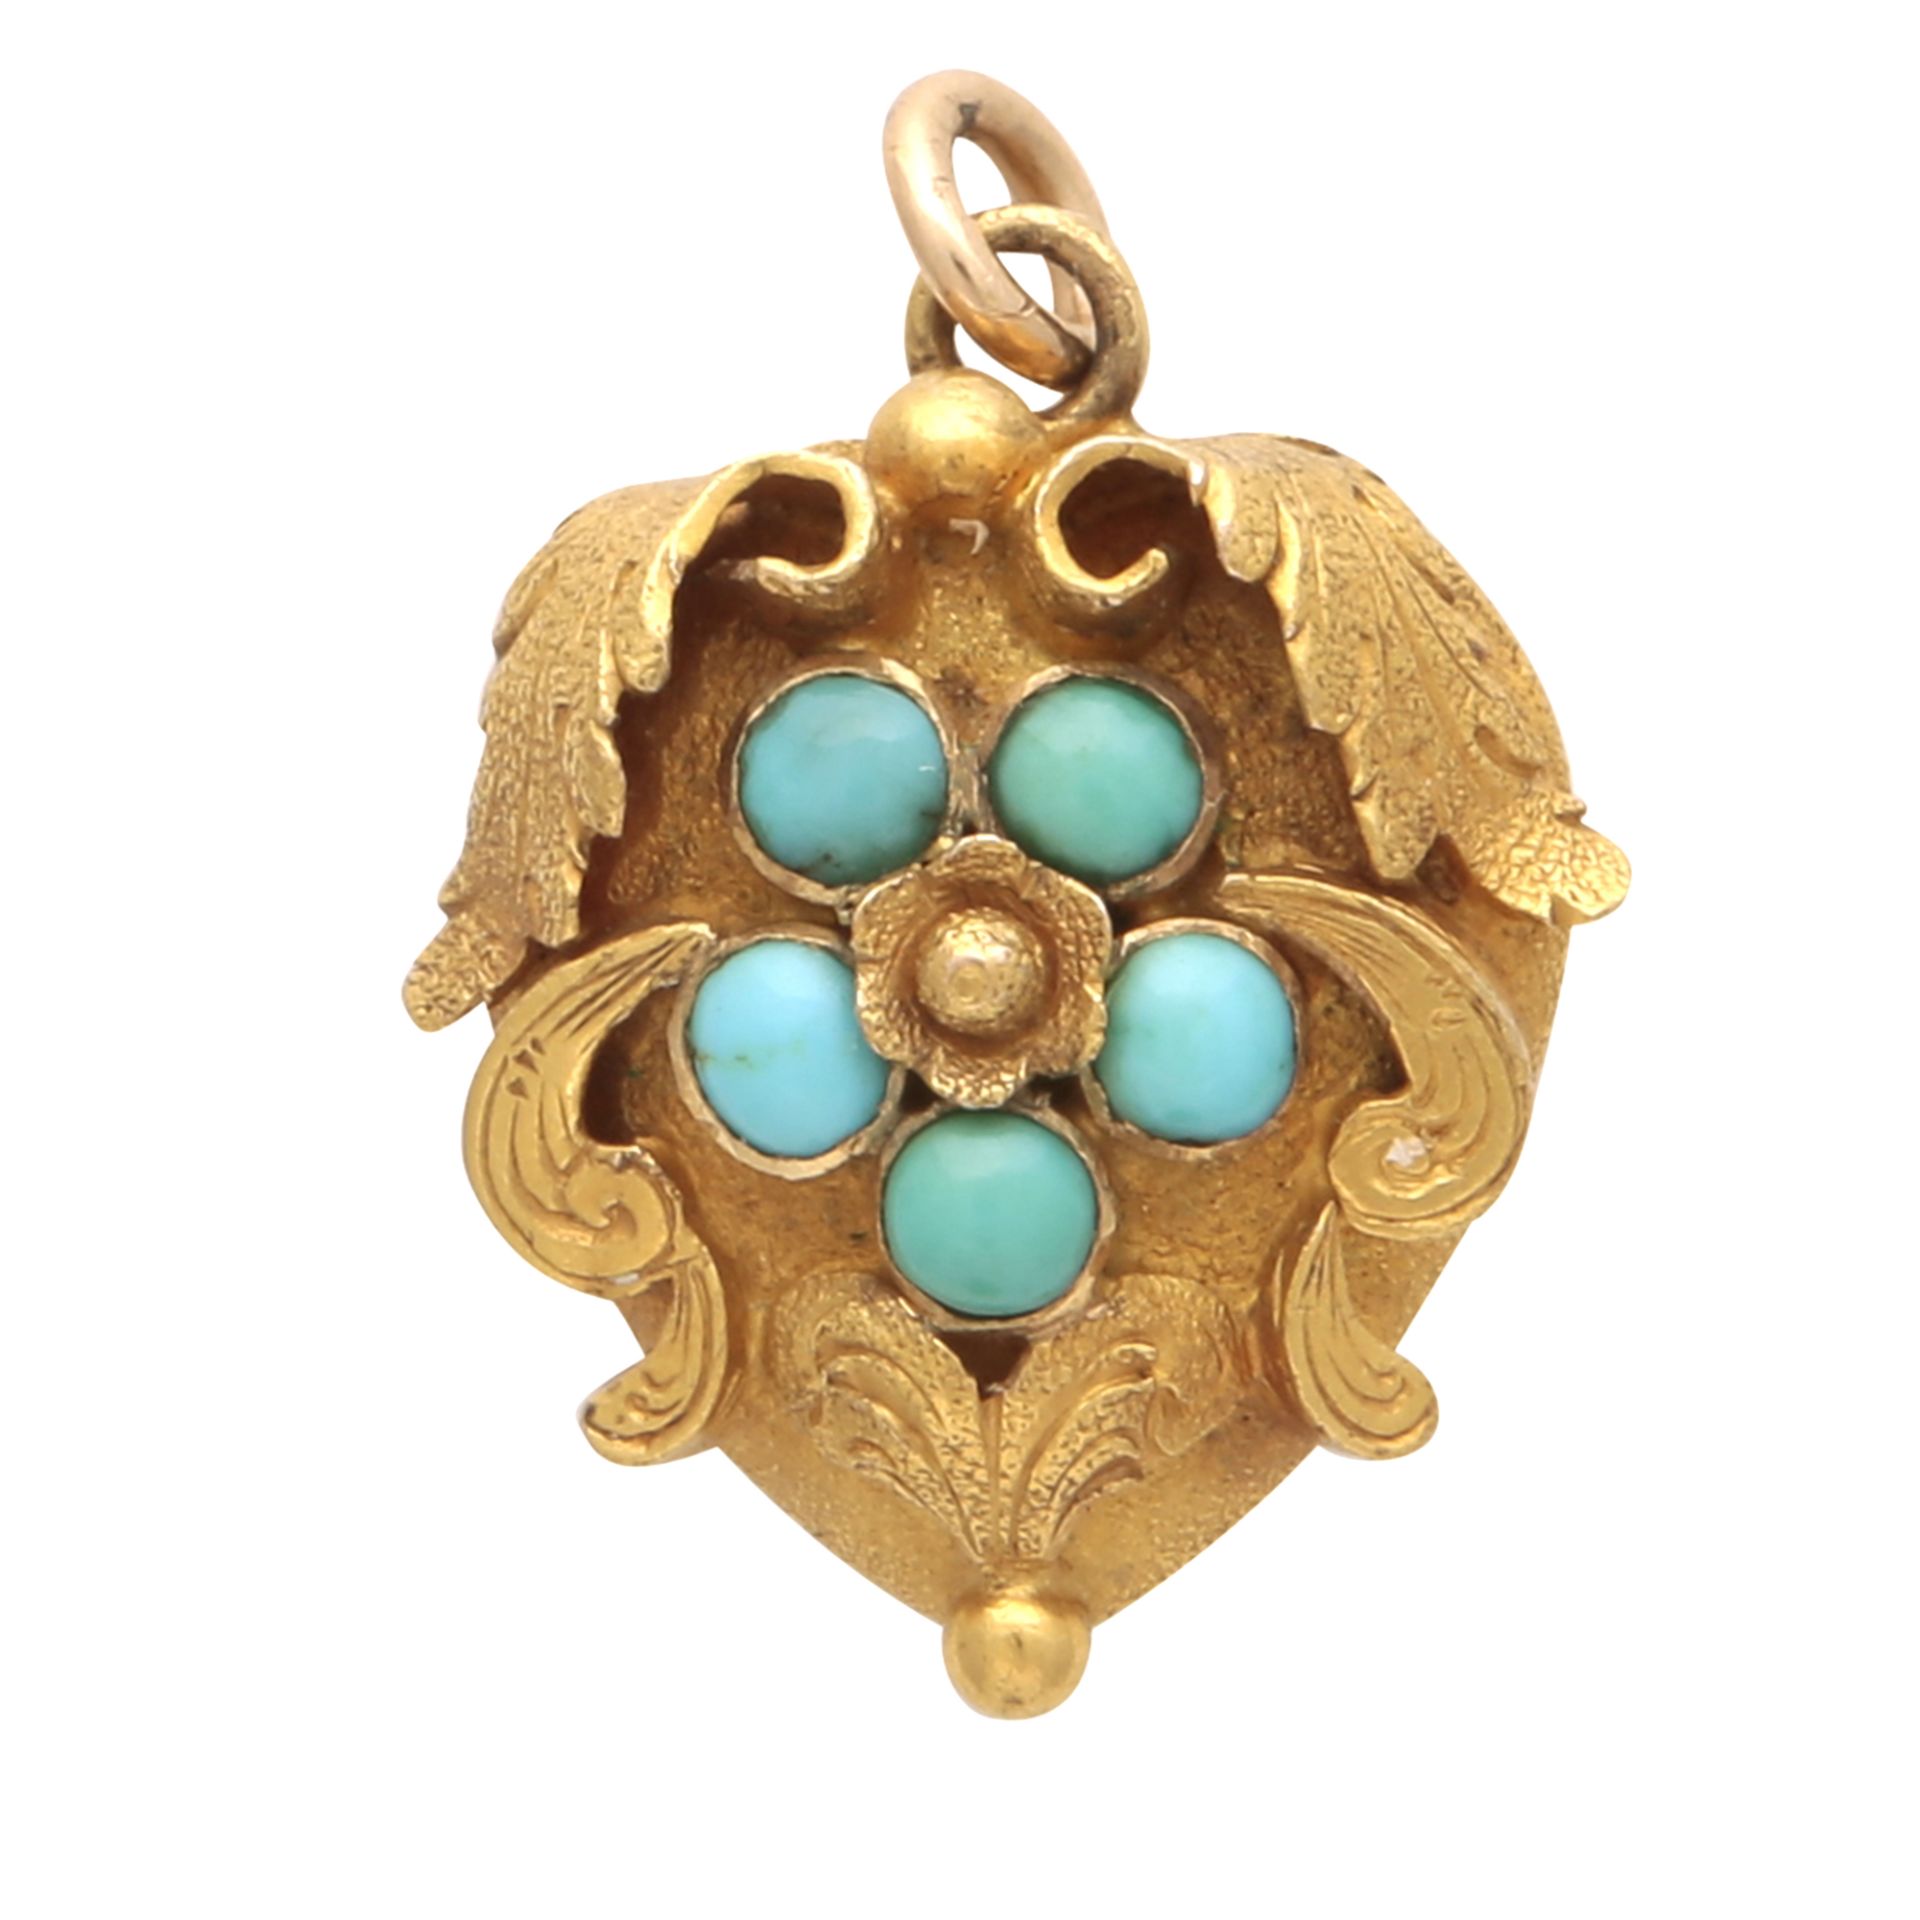 An antique Victorian turquoise bead heart pendant in high carat yellow gold designed as a heart